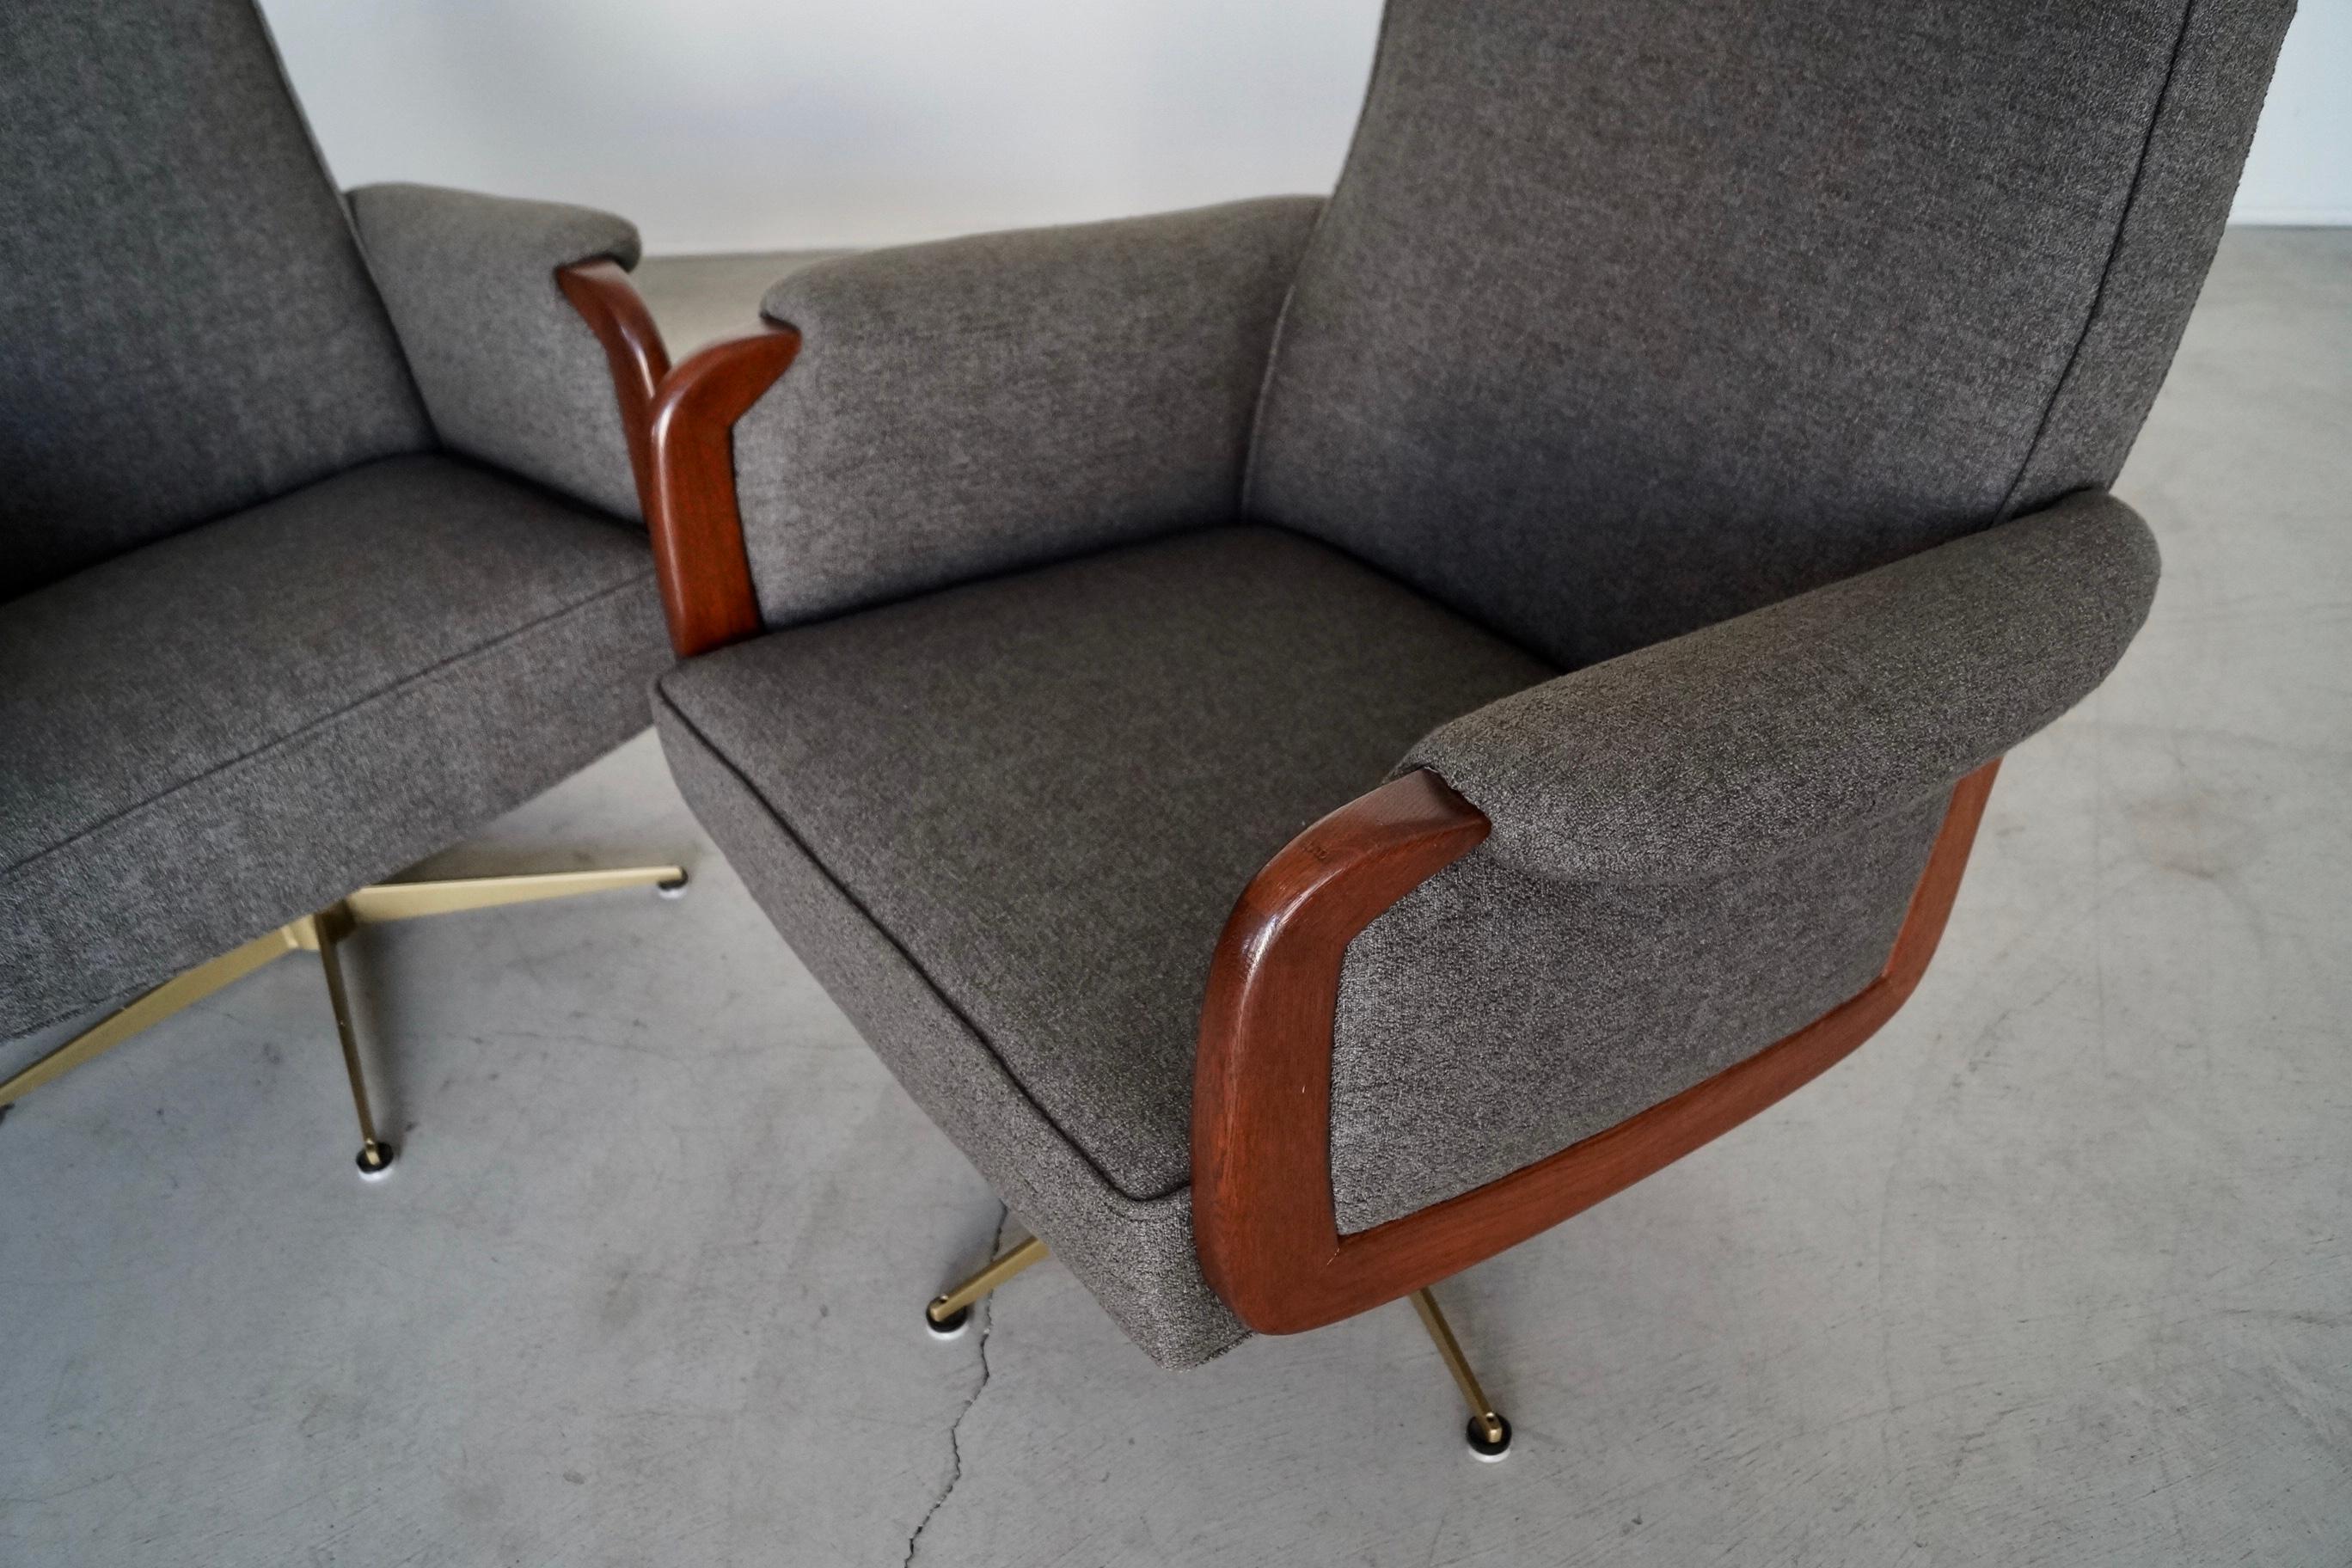 1970's Mid-Century Modern Swivel Lounge Chairs - a Pair For Sale 5